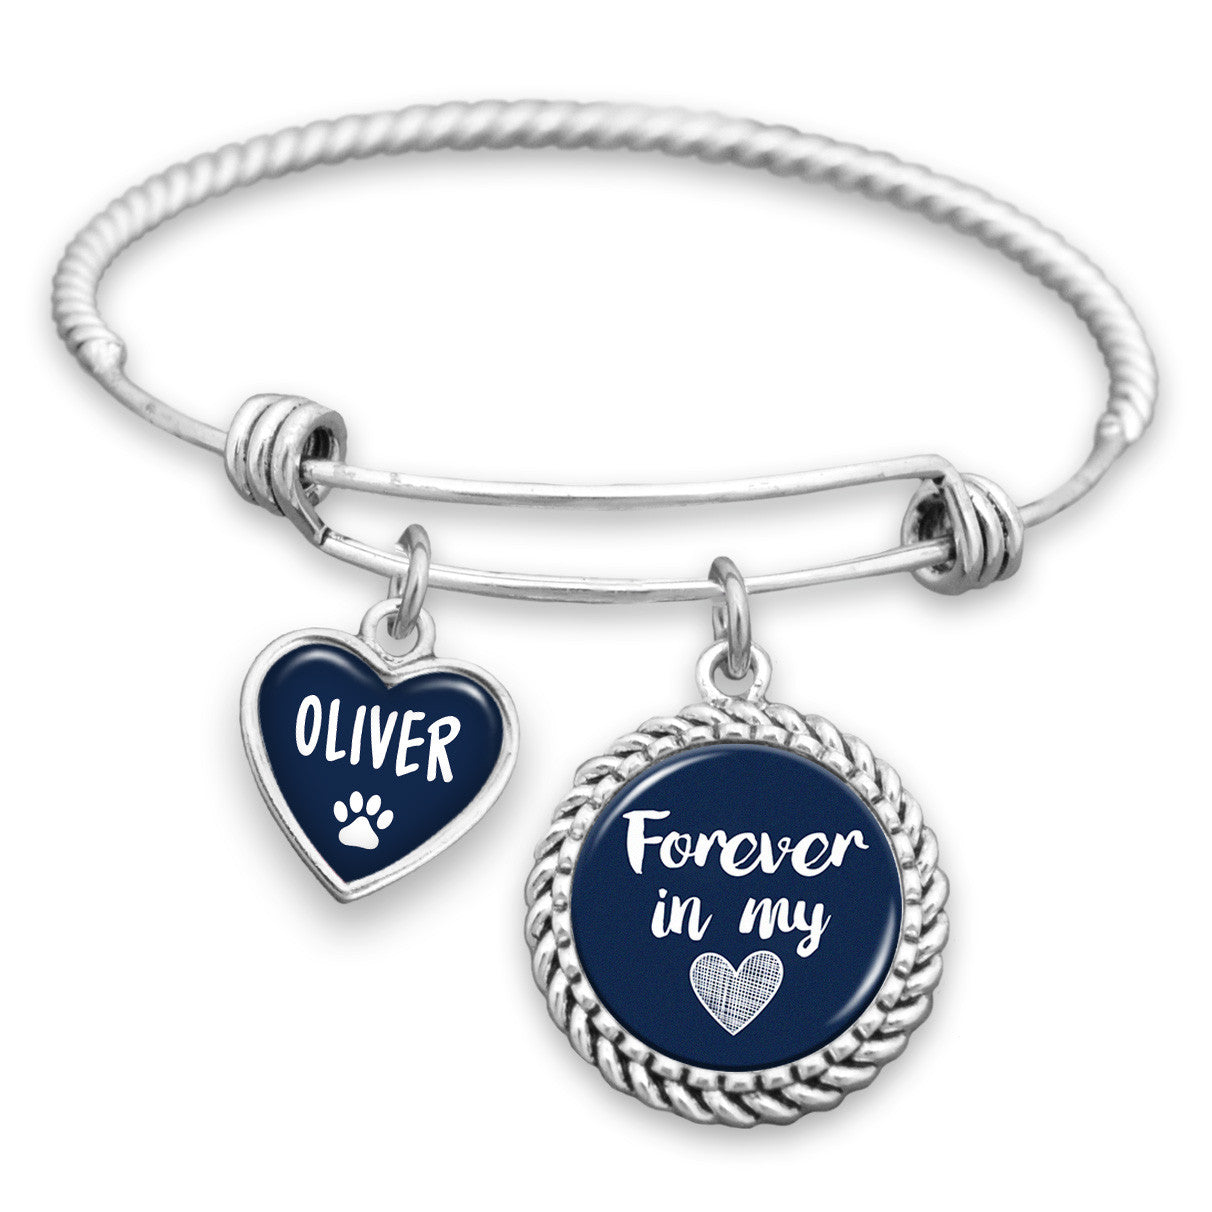 Forever In My Heart Personalized Pet Name Charm Bracelet